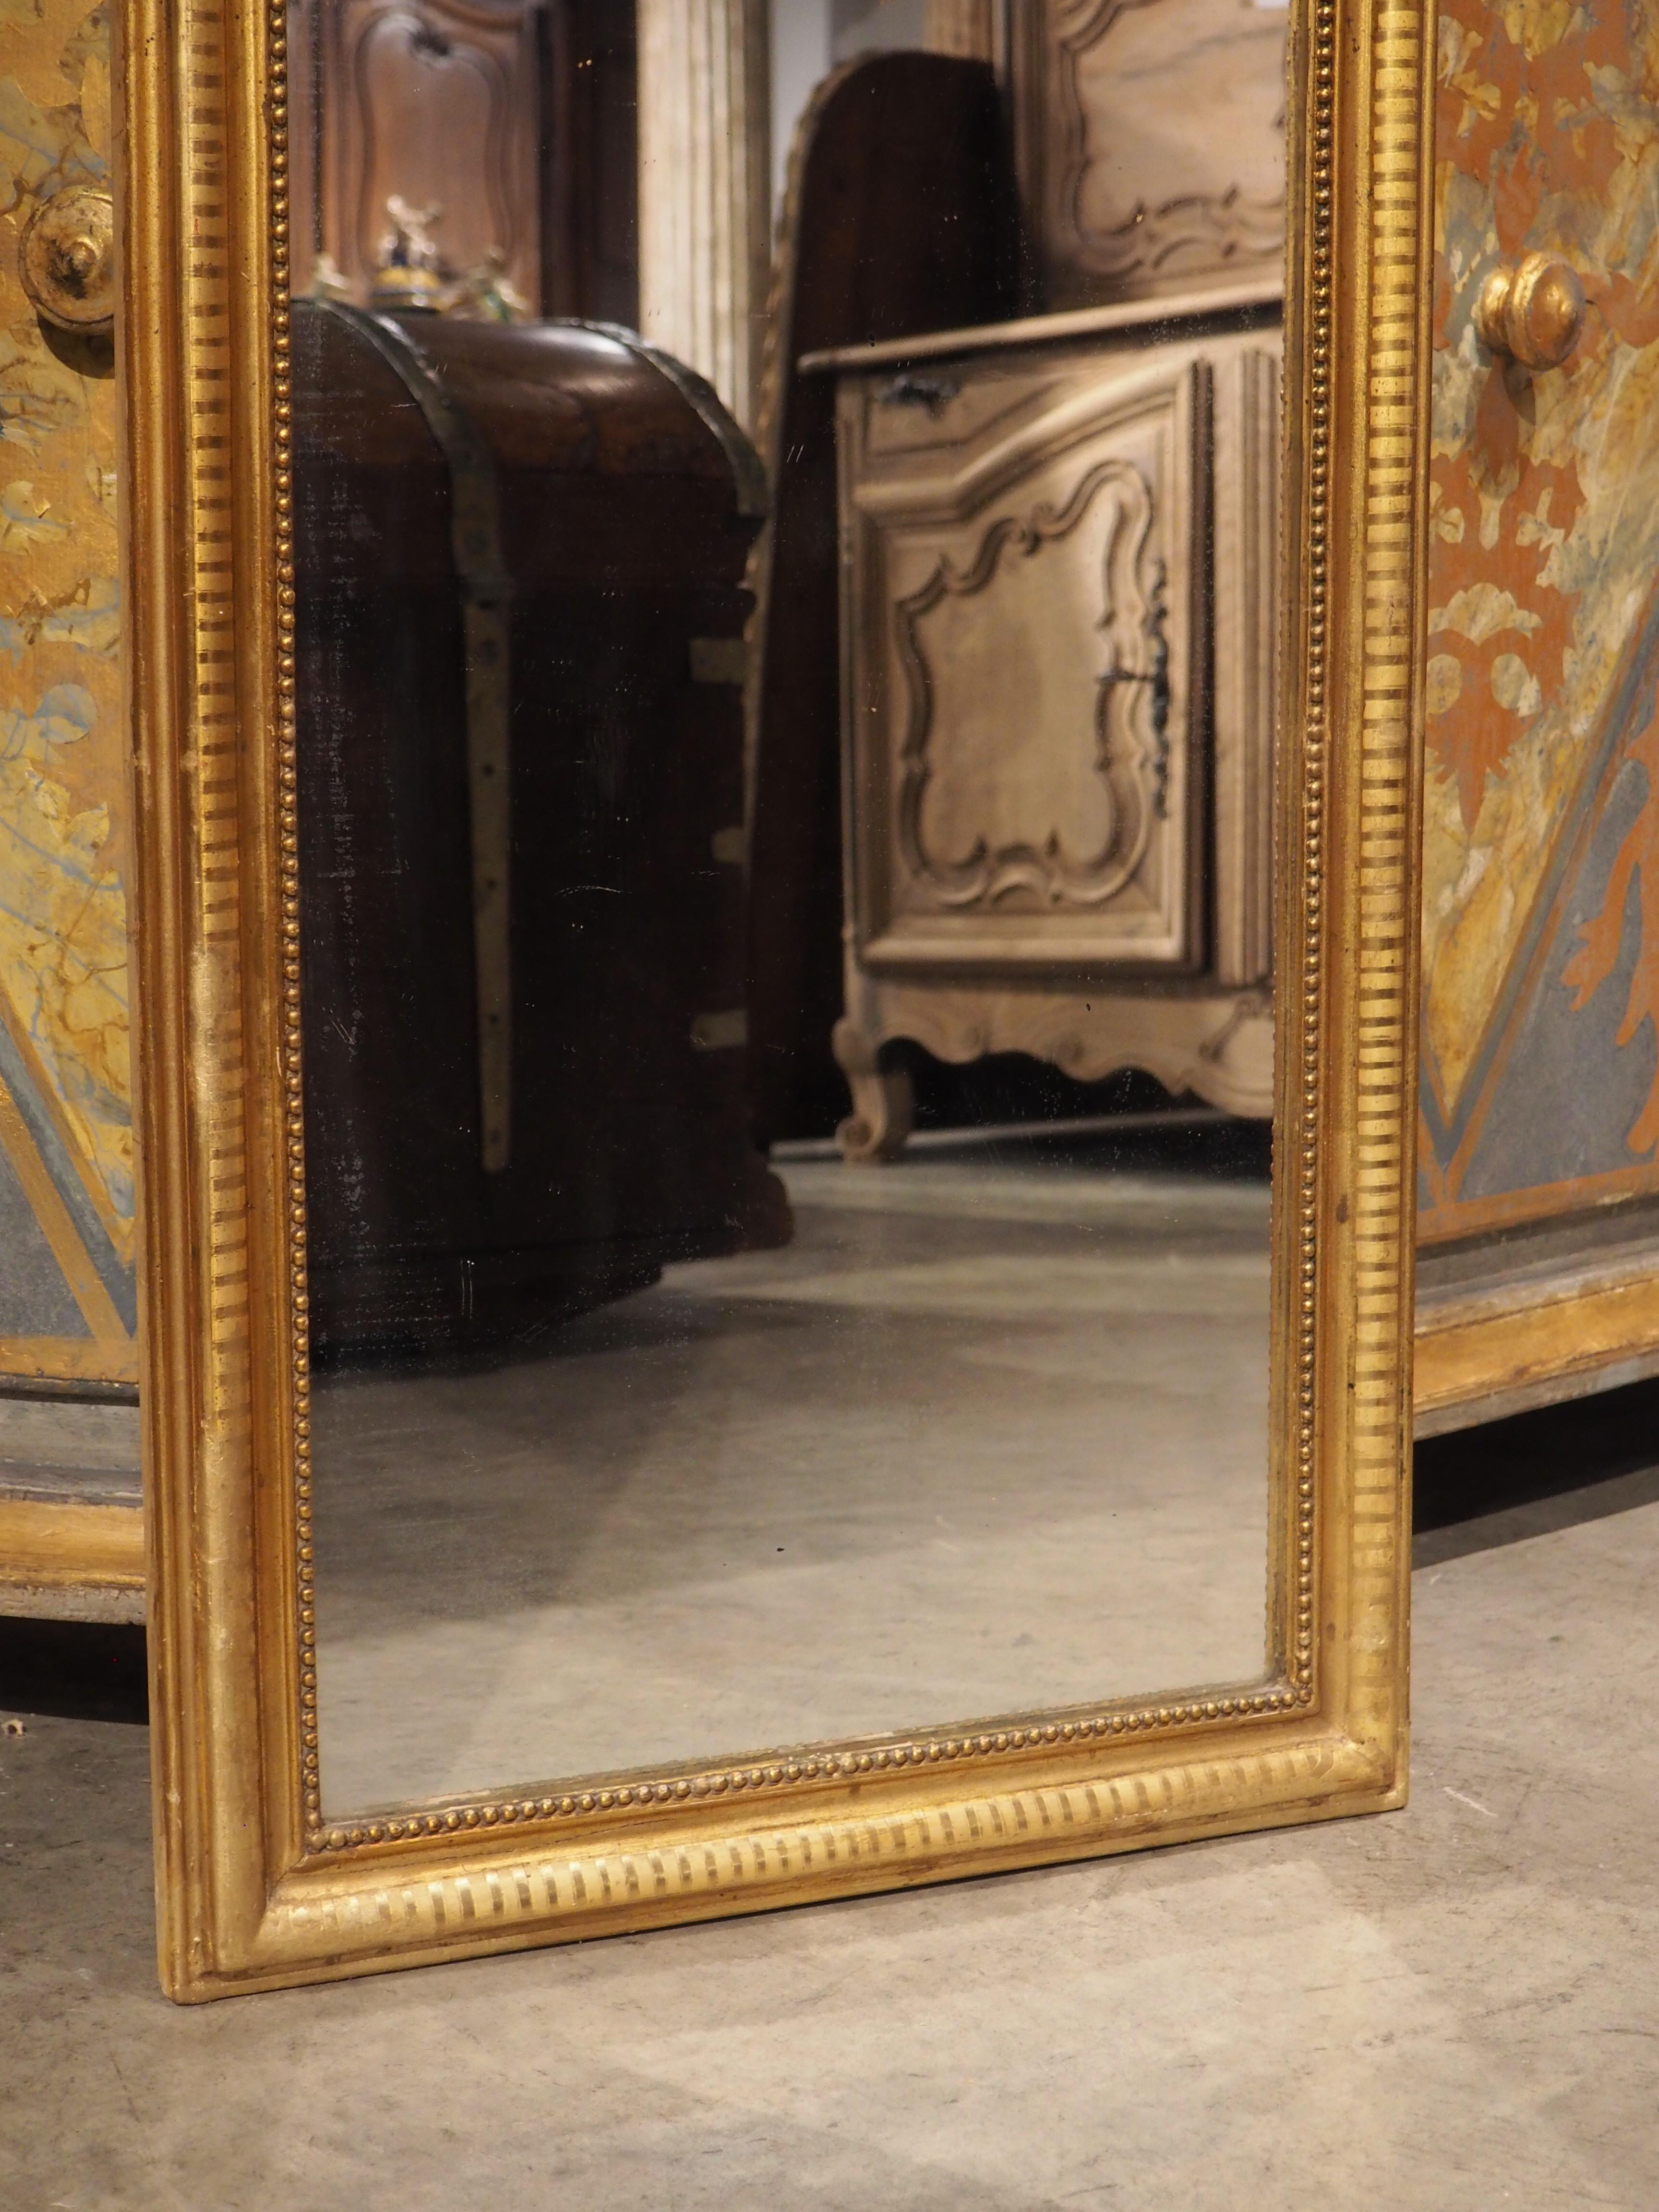 Louis Philippe mirrors are always in high demand, as their clean lines and subtle embellishments mesh with almost any style of interior design. The understated elegance of this period Louis Philippe (circa 1840) mirror is magnified due to the